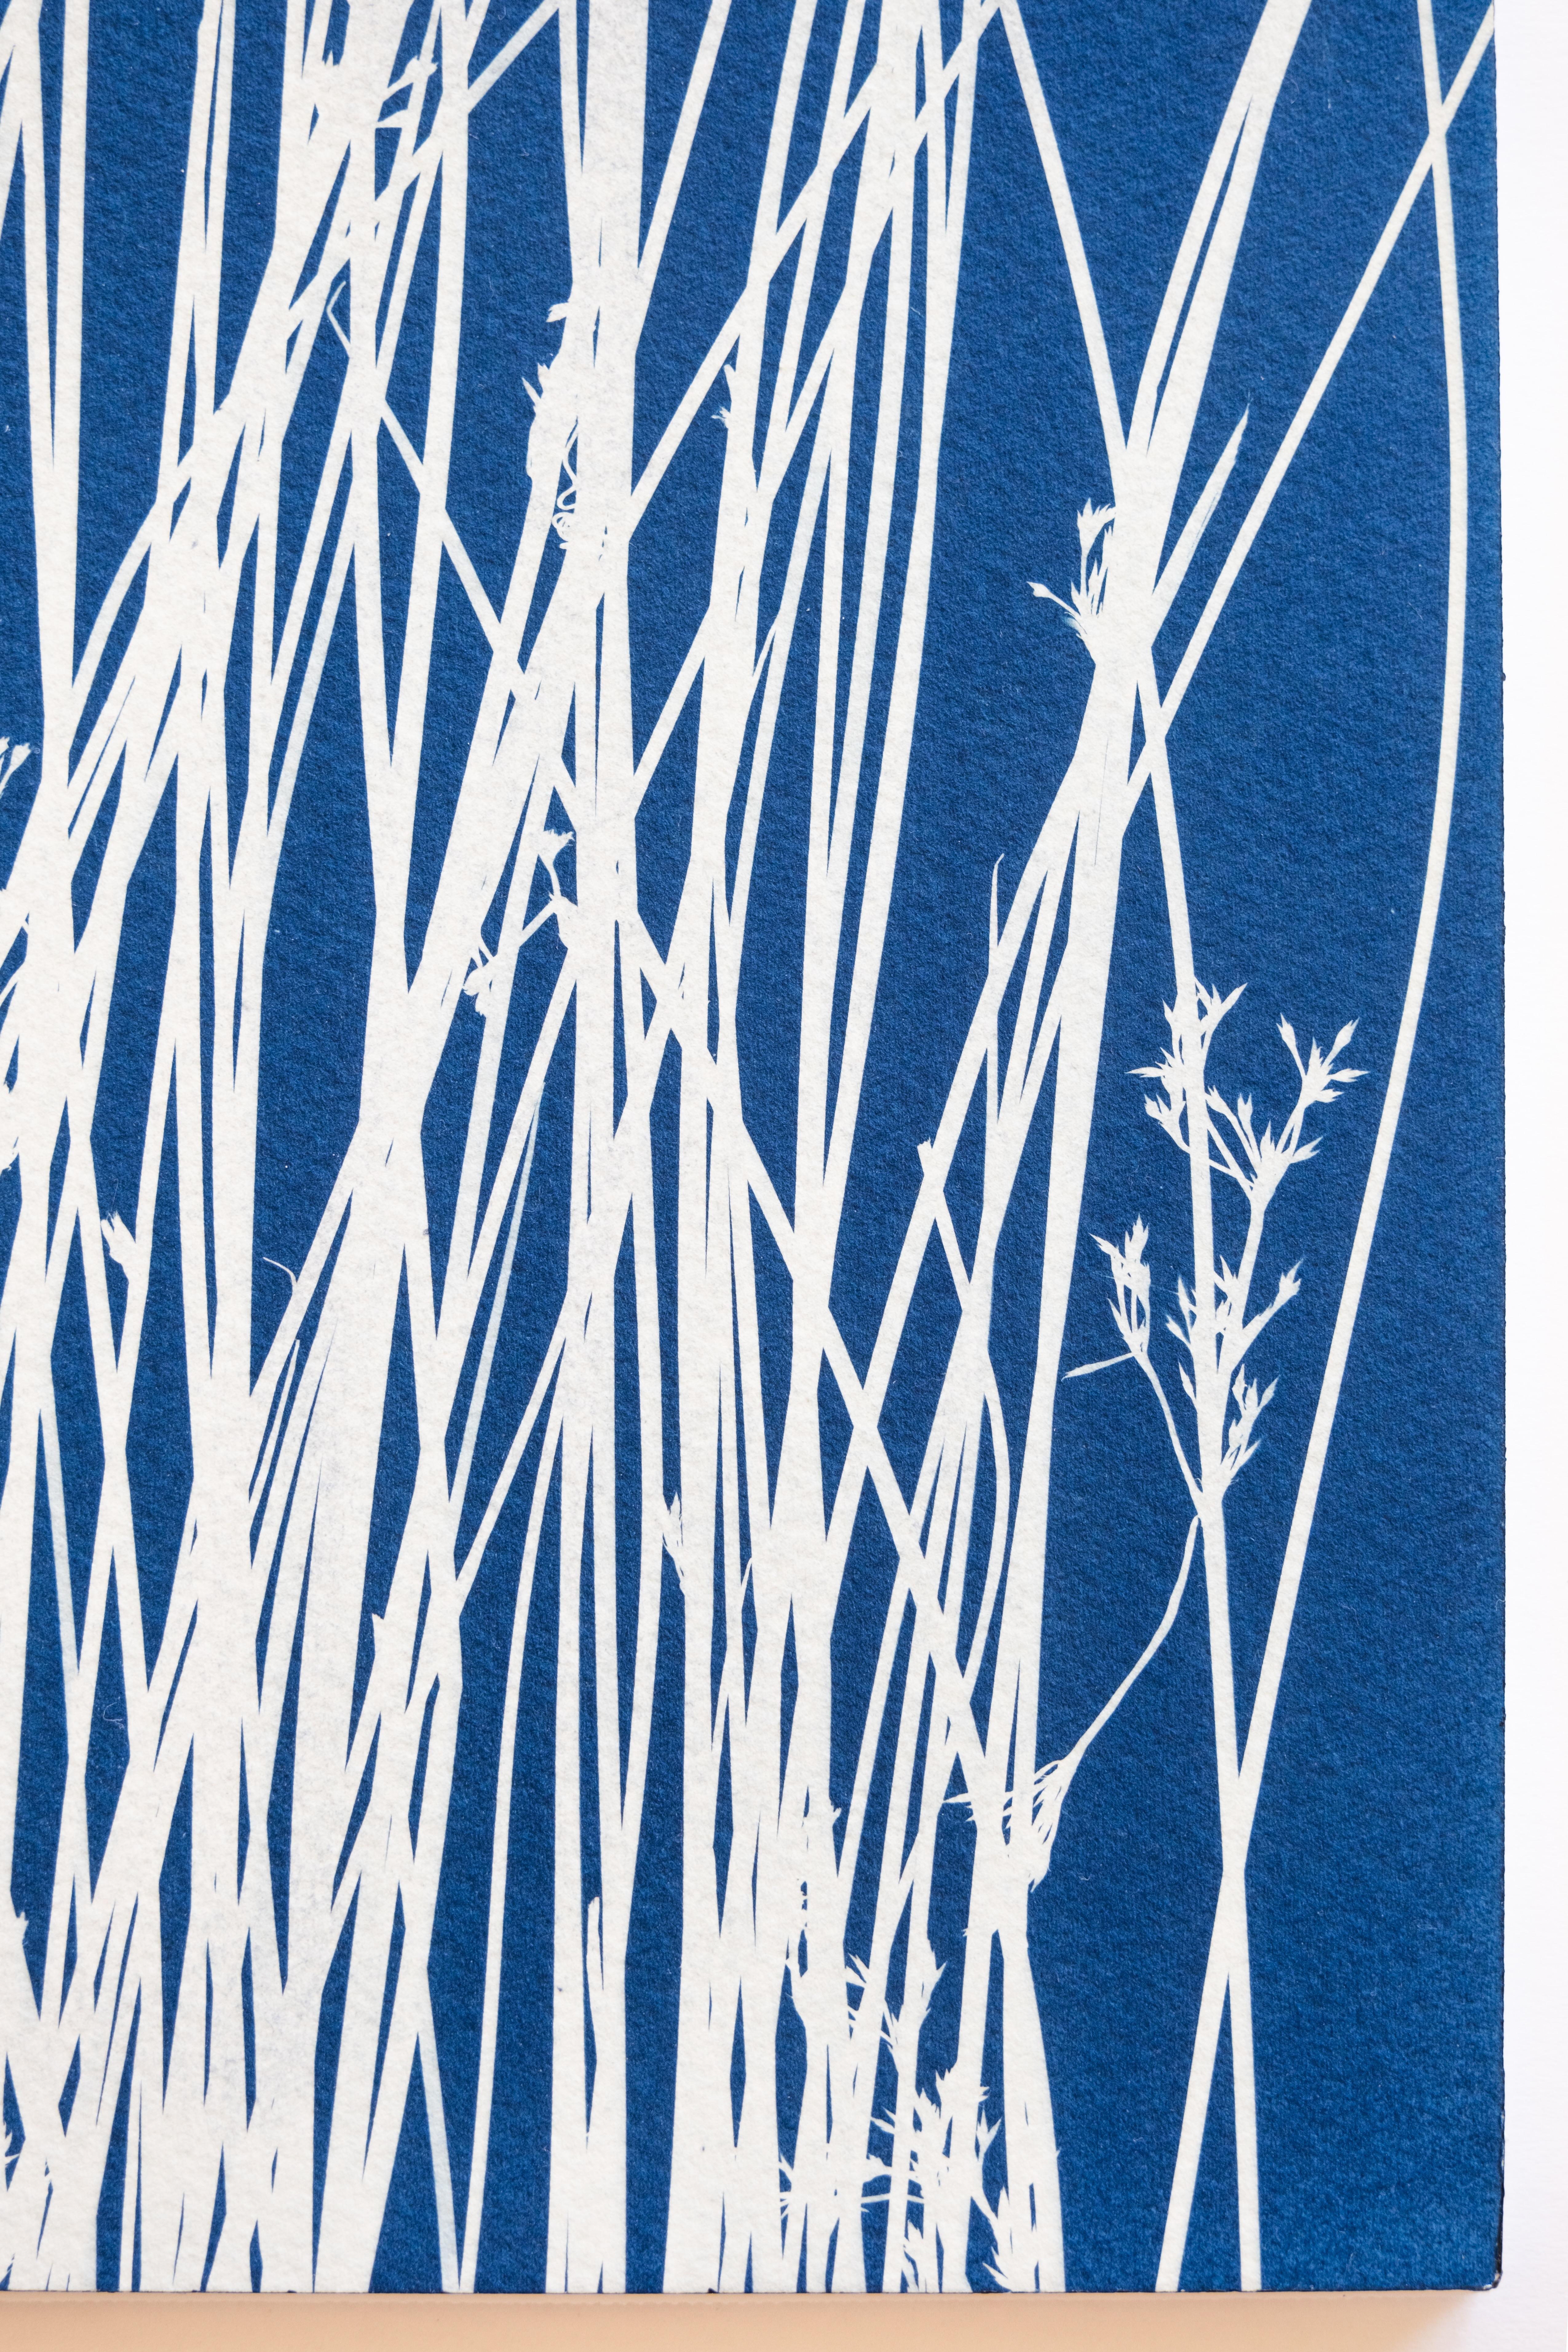 The Pond II  (hand-printed botanical cyanotype, 24 x 18 inches) For Sale 1